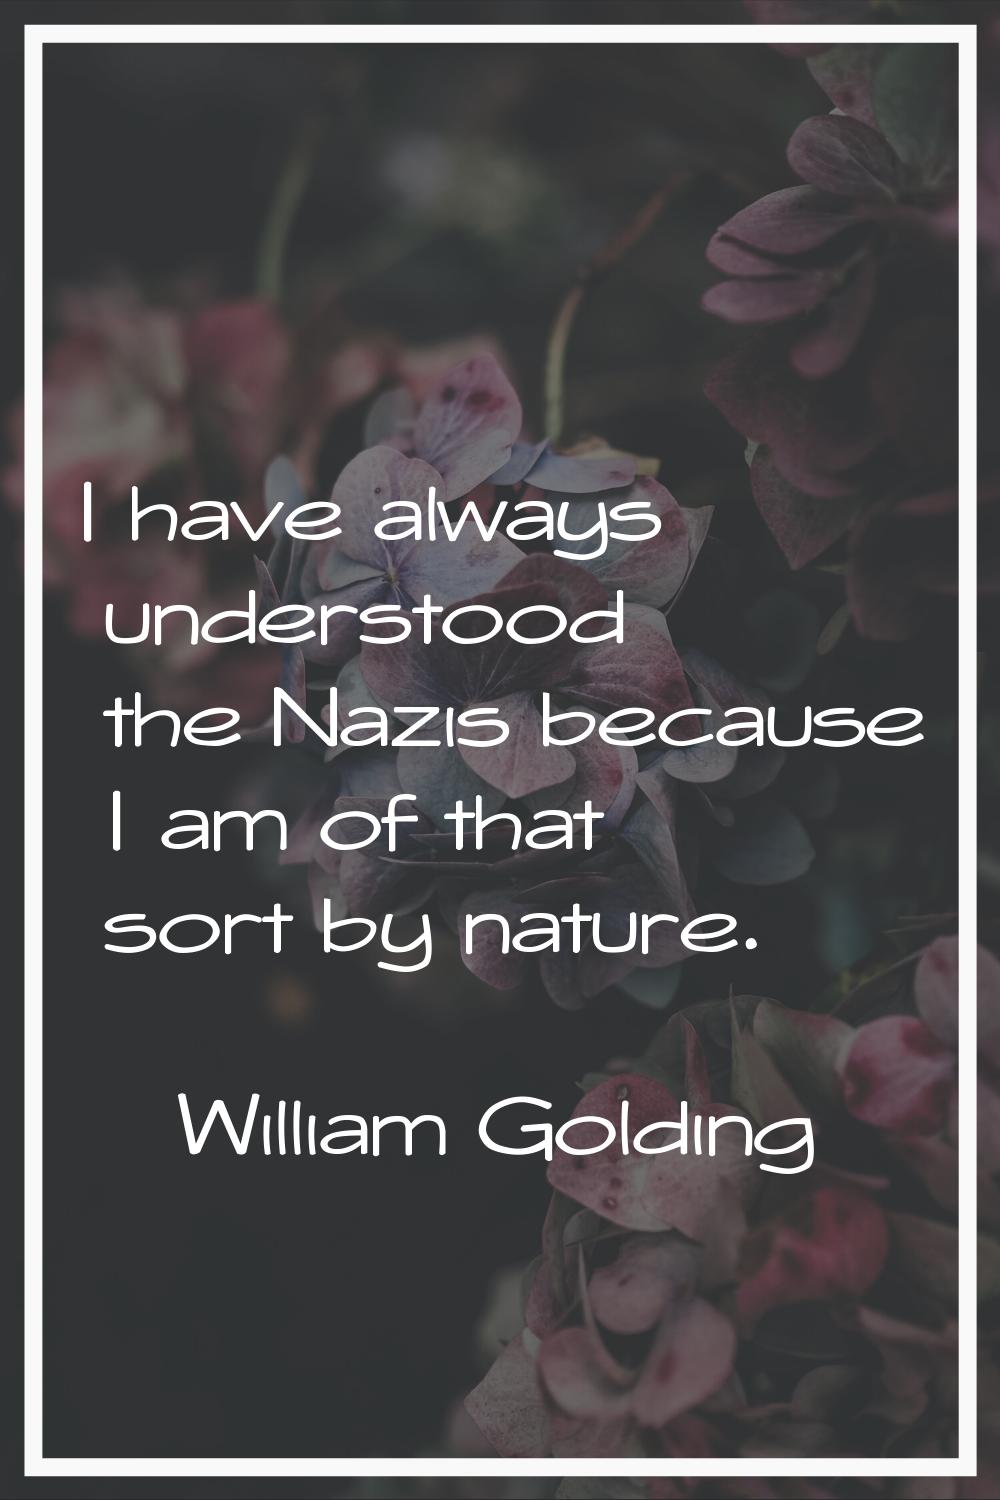 I have always understood the Nazis because I am of that sort by nature.